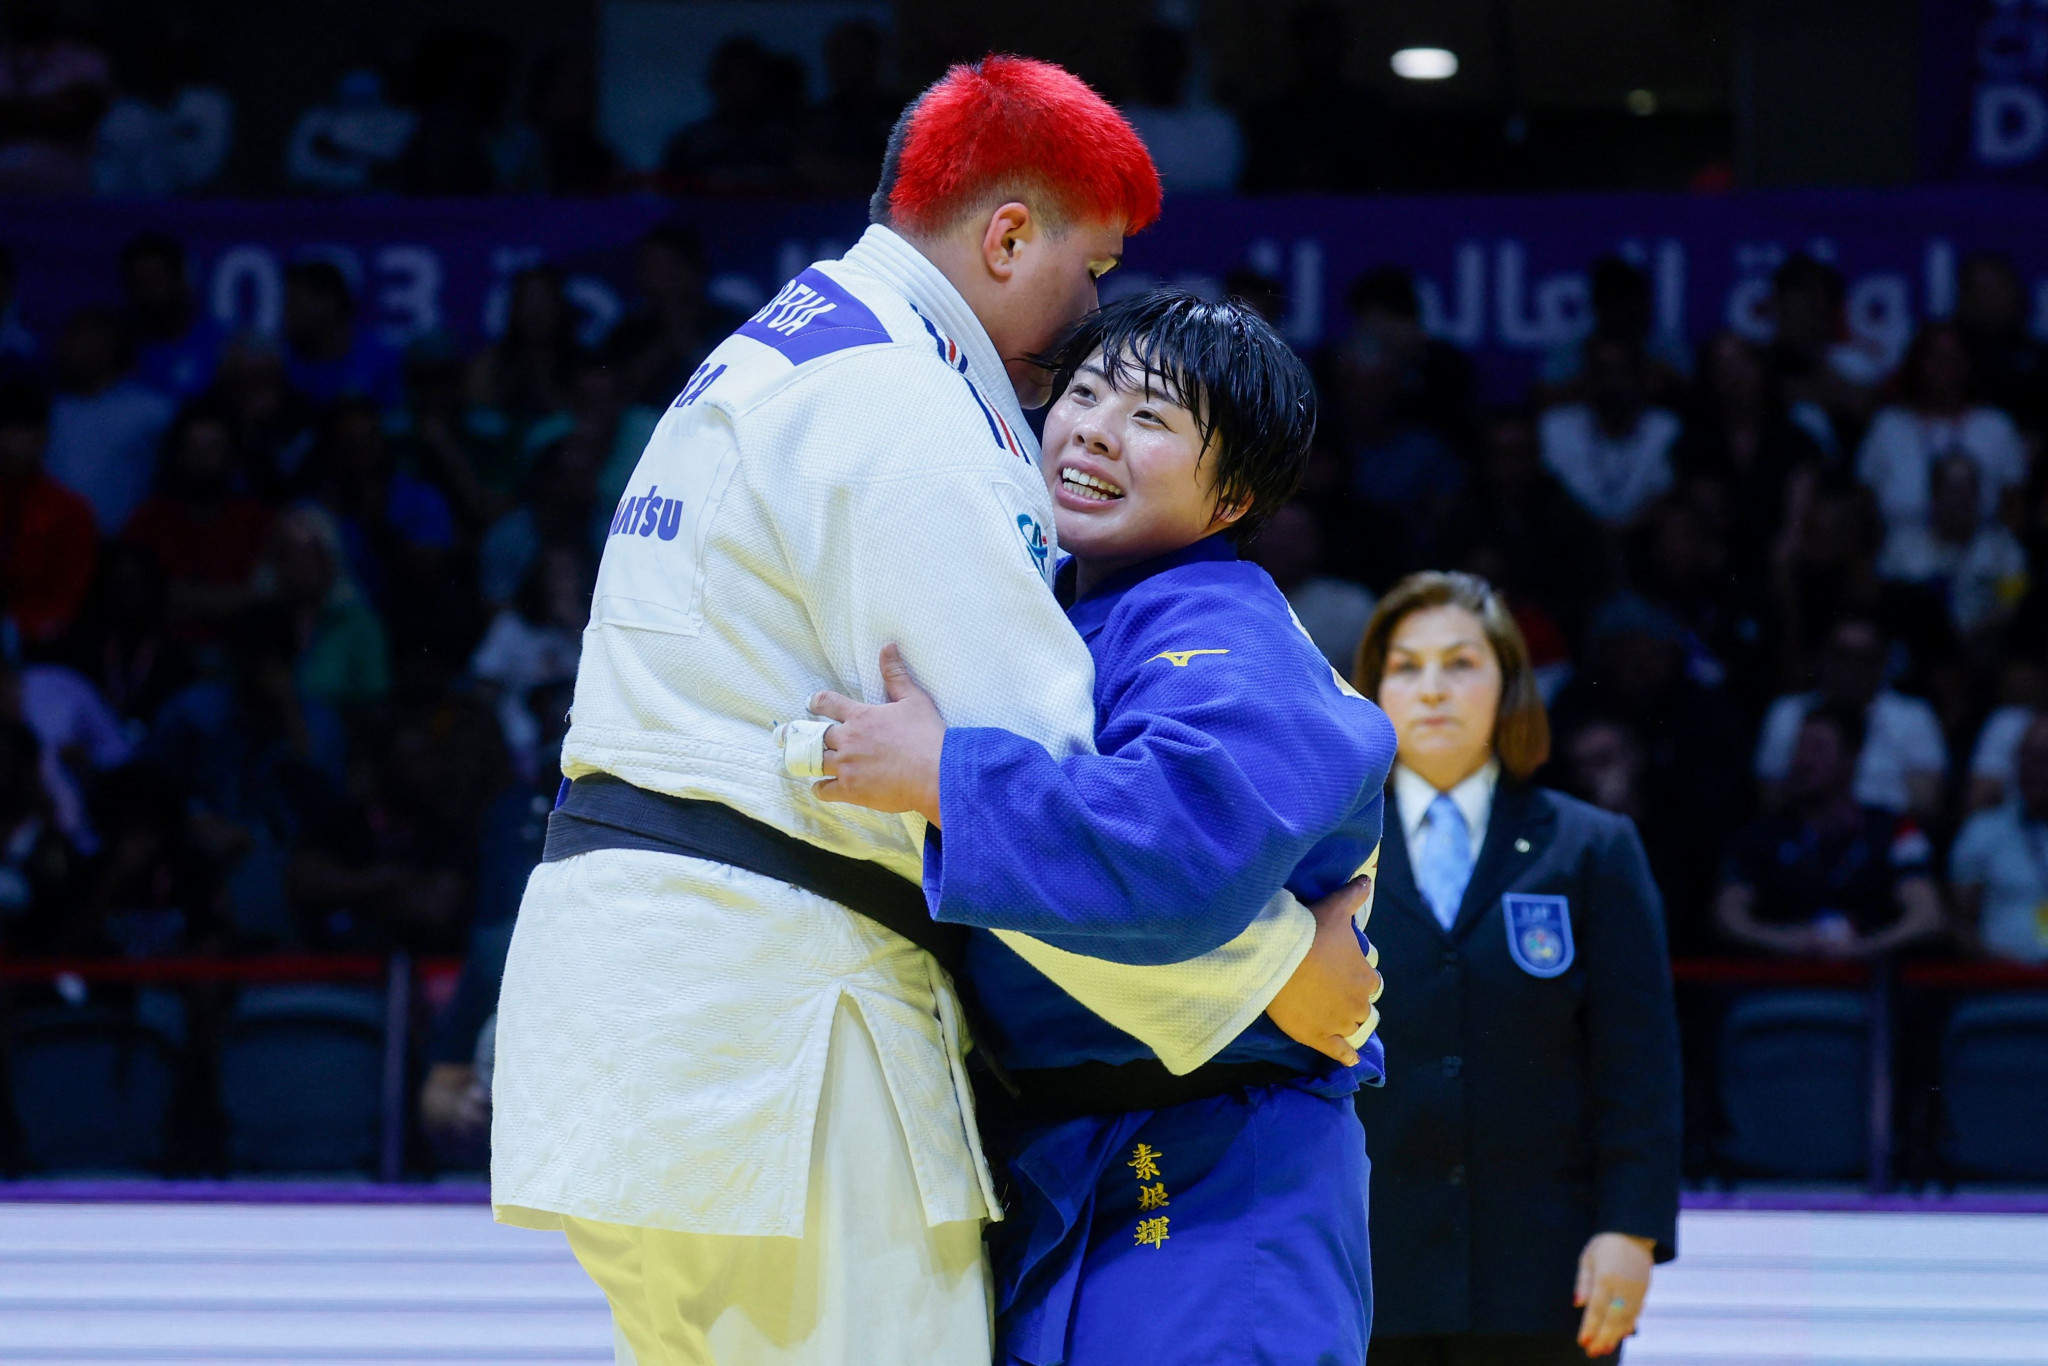 Julia Tolofua of France failed to get the better of reigning Olympic champion Akira Sone of Japan despite her superior height advantage ©Getty Images